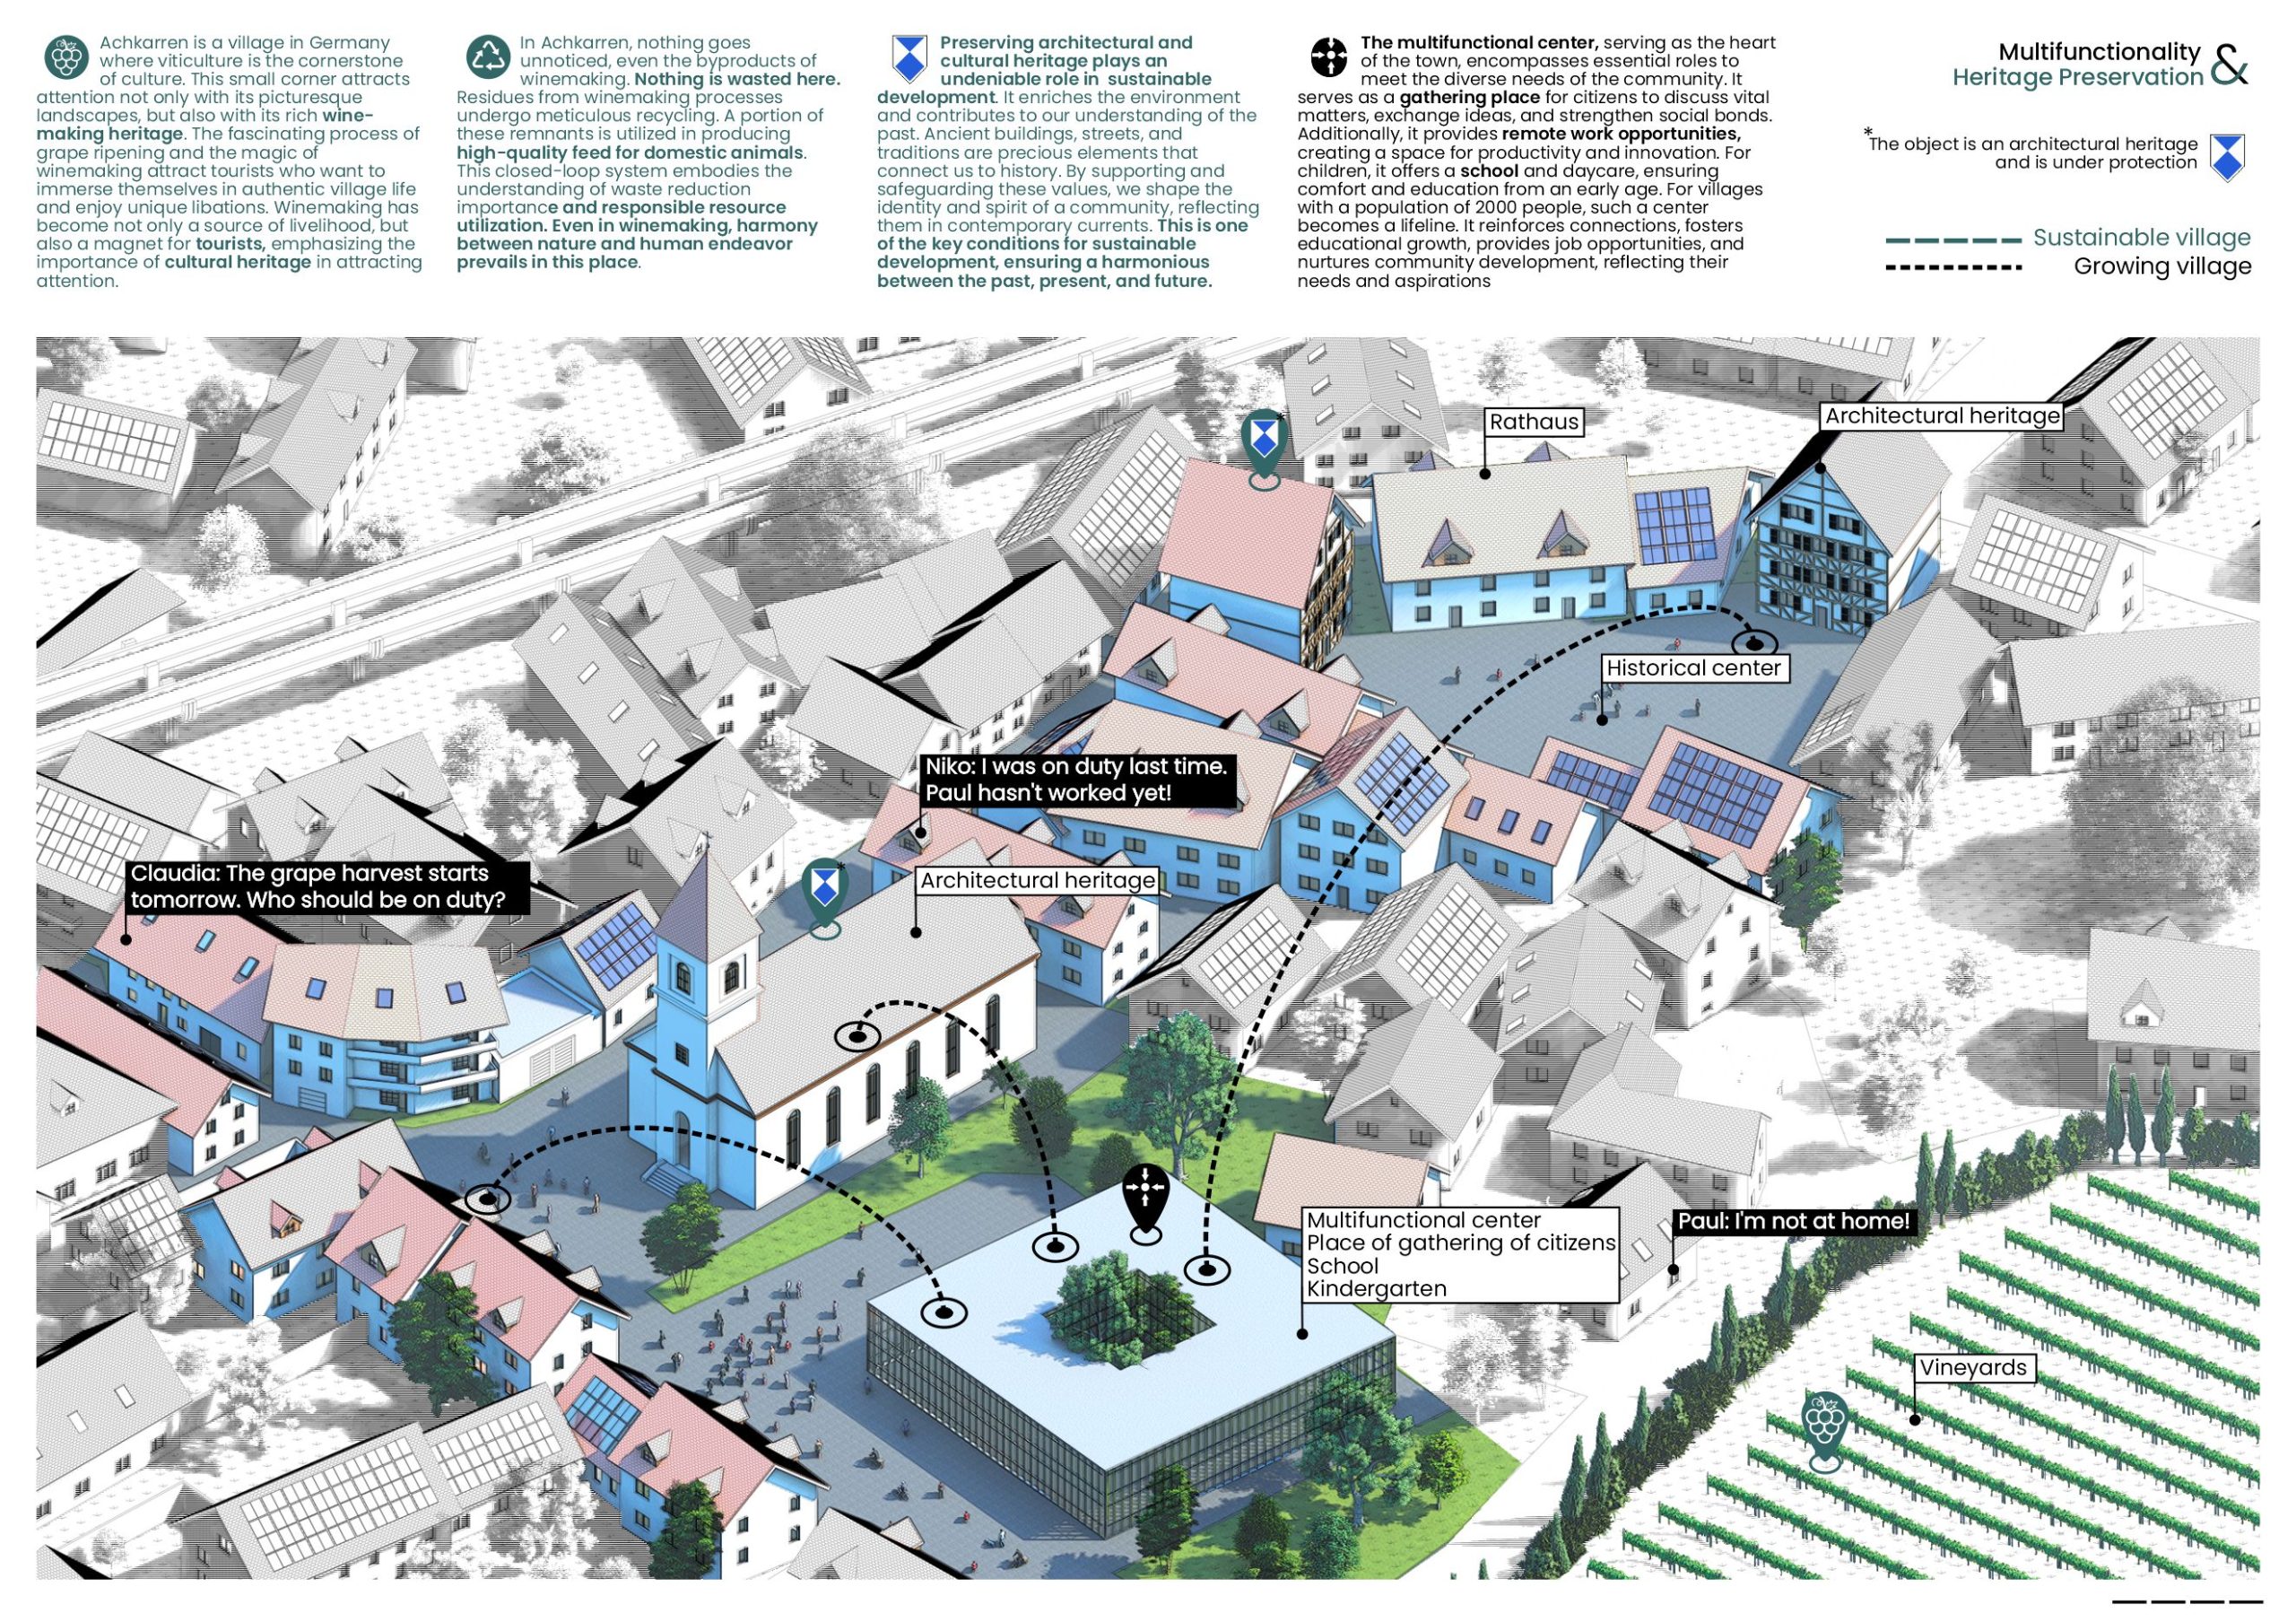  Selected project – Pavel Kosenkov – Achkarren, Growing and sustainable village  Perspektive